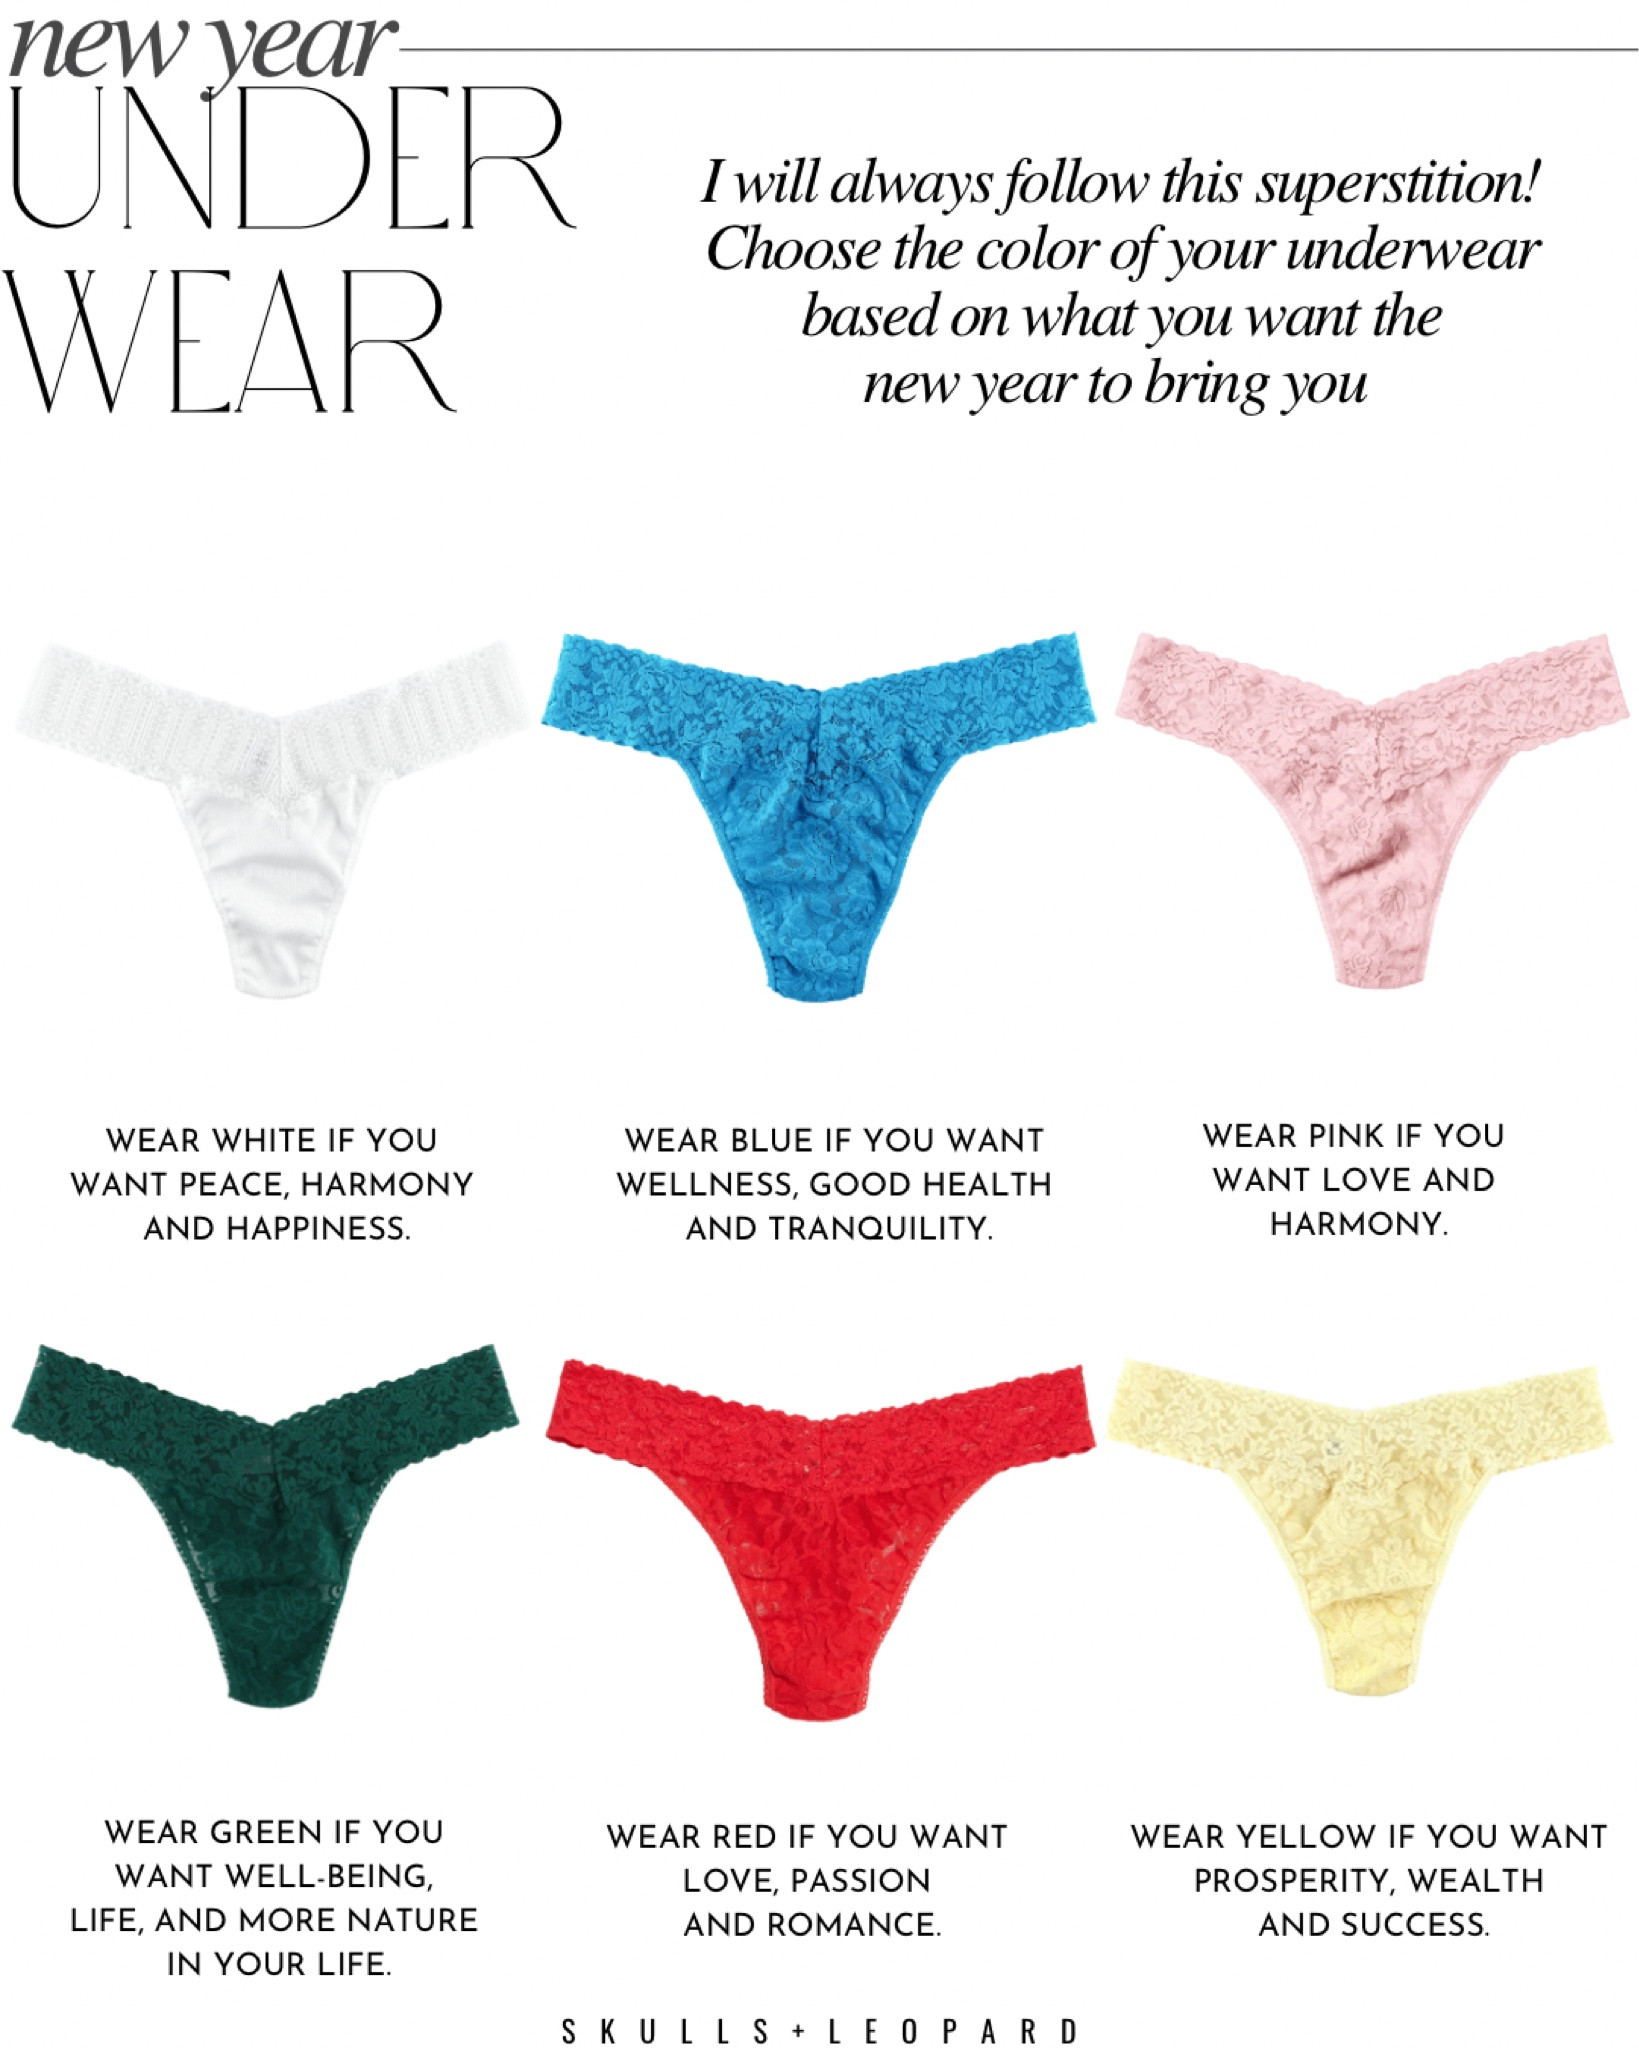 Hanky Panky Signature Lace Thong (multiple colors) — Two Friends